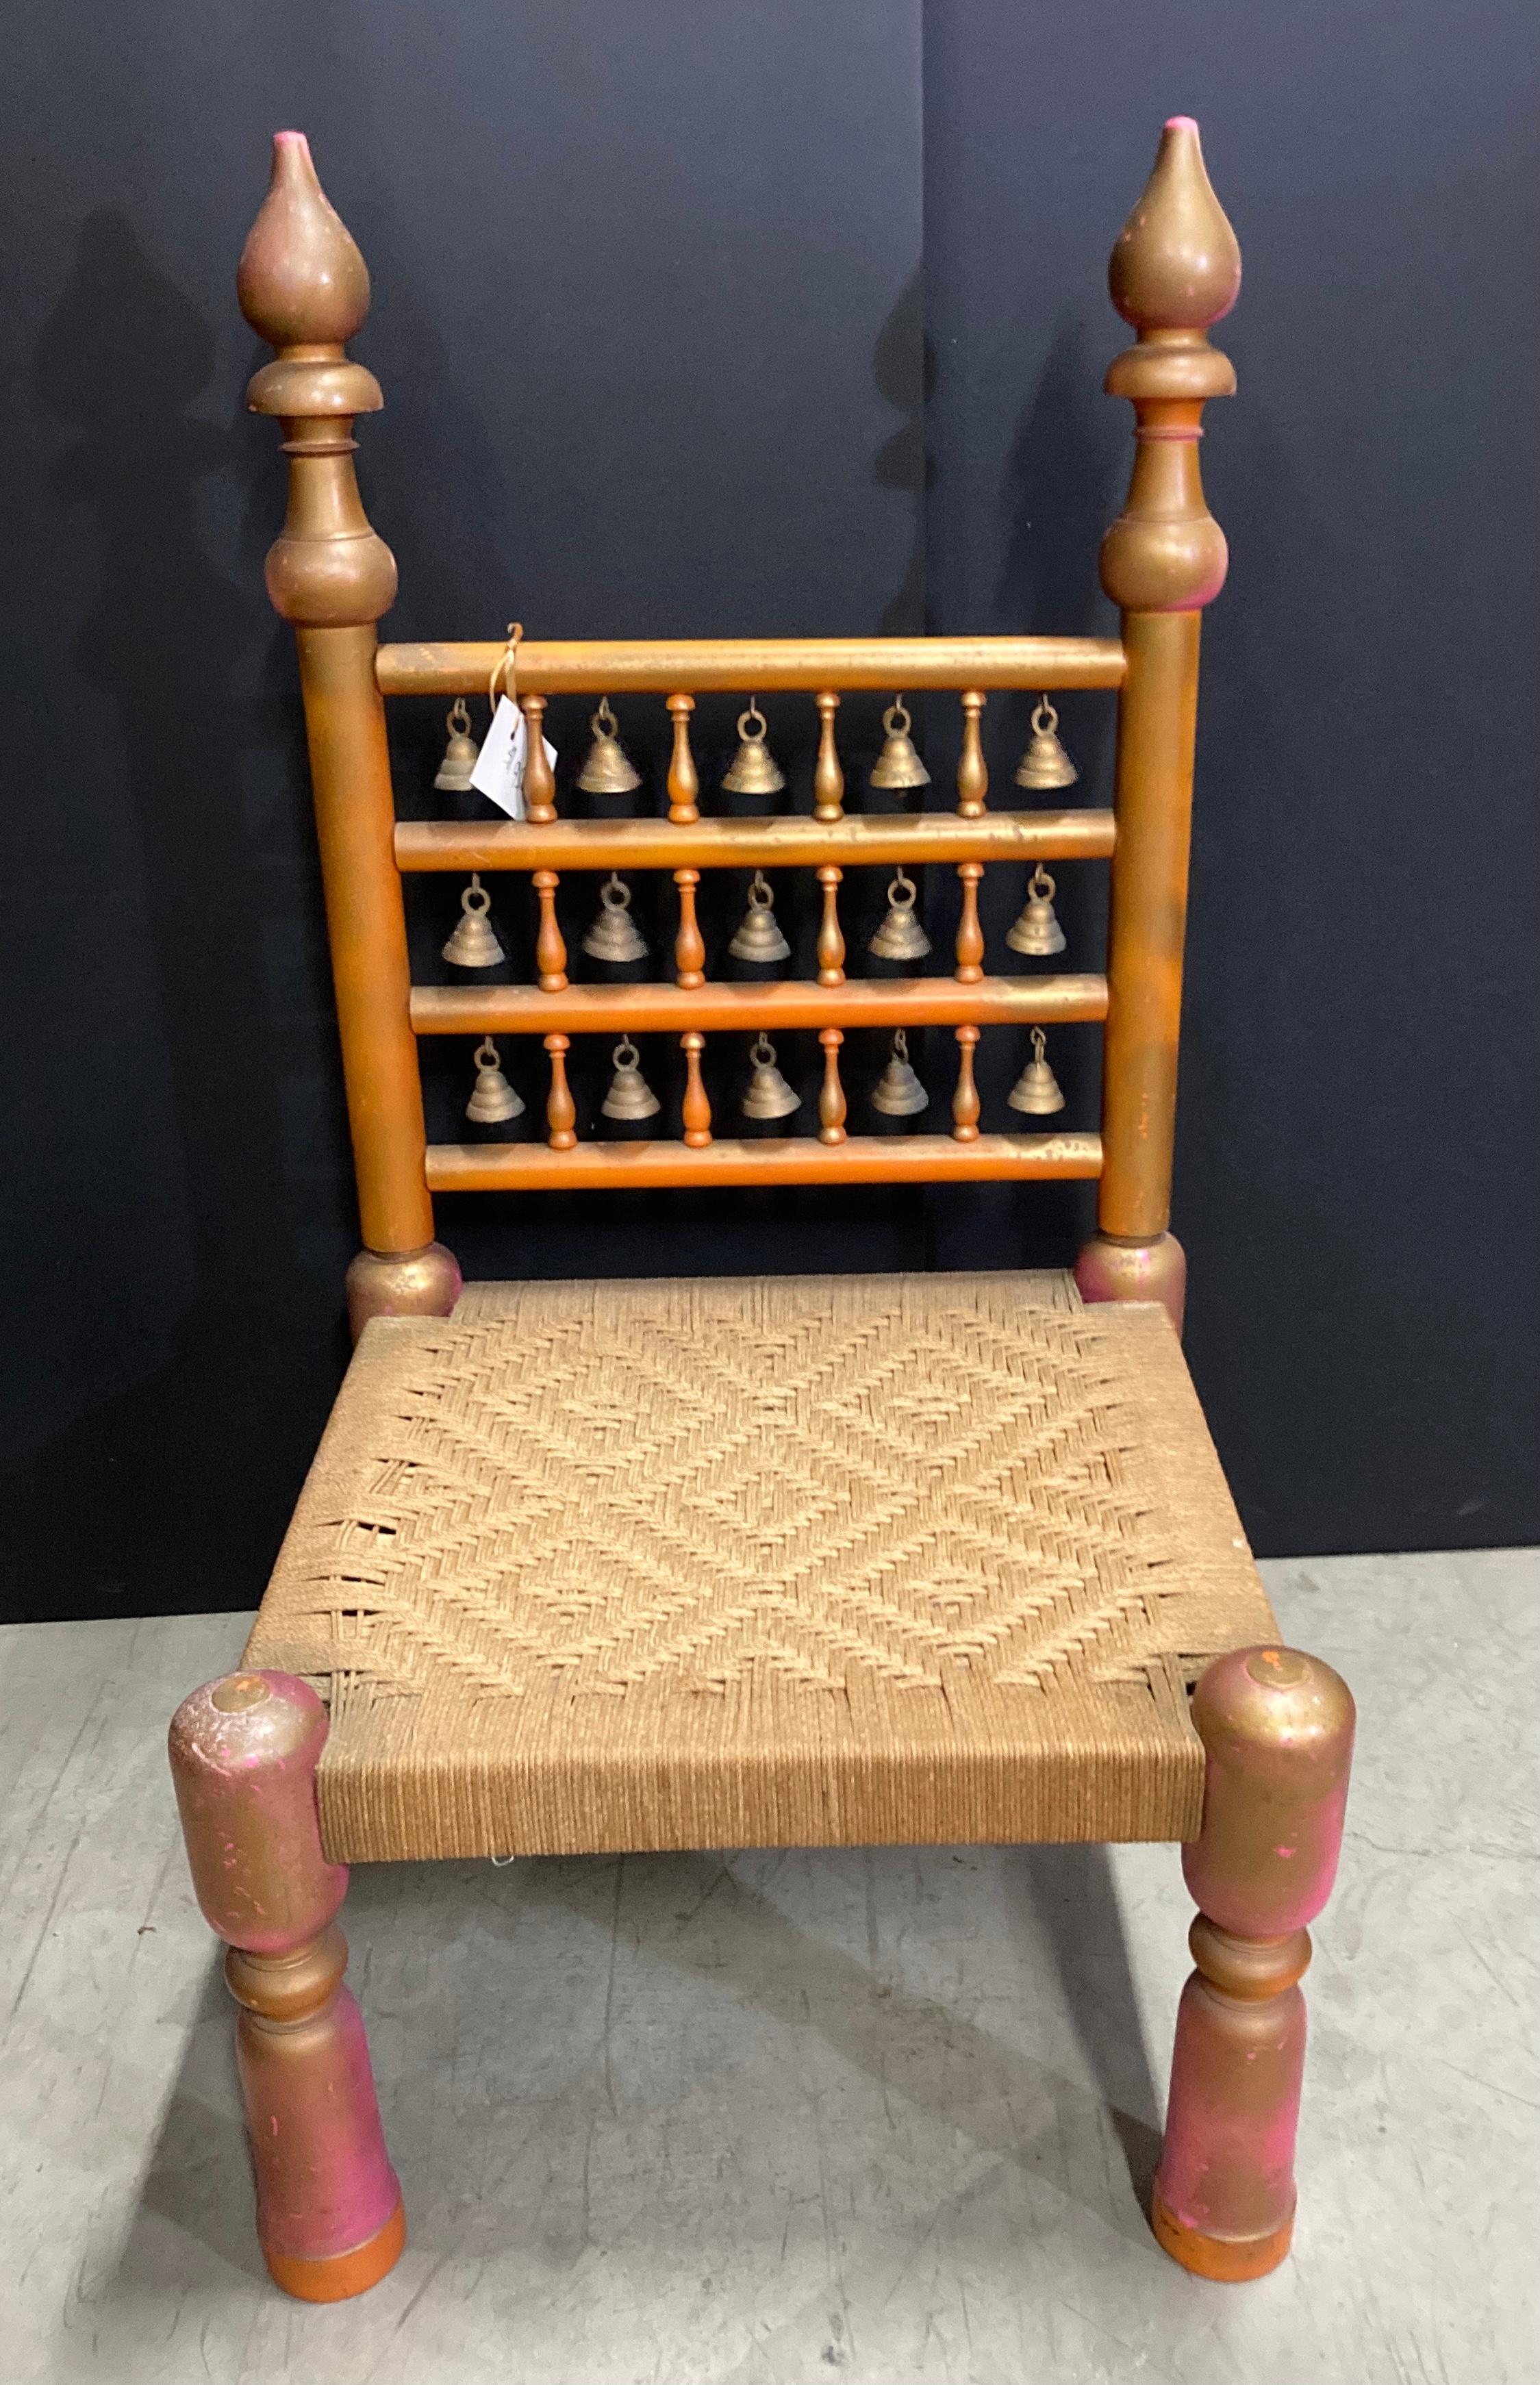 Rajasthani low Moorish chair with happy colors, pink orange and gold, with small brass bells and cane seat.
Great for kids, Moroccan room or a yoga room.
Midcentury low chair with rope seat handcrafted in India.
The chair features four turned legs